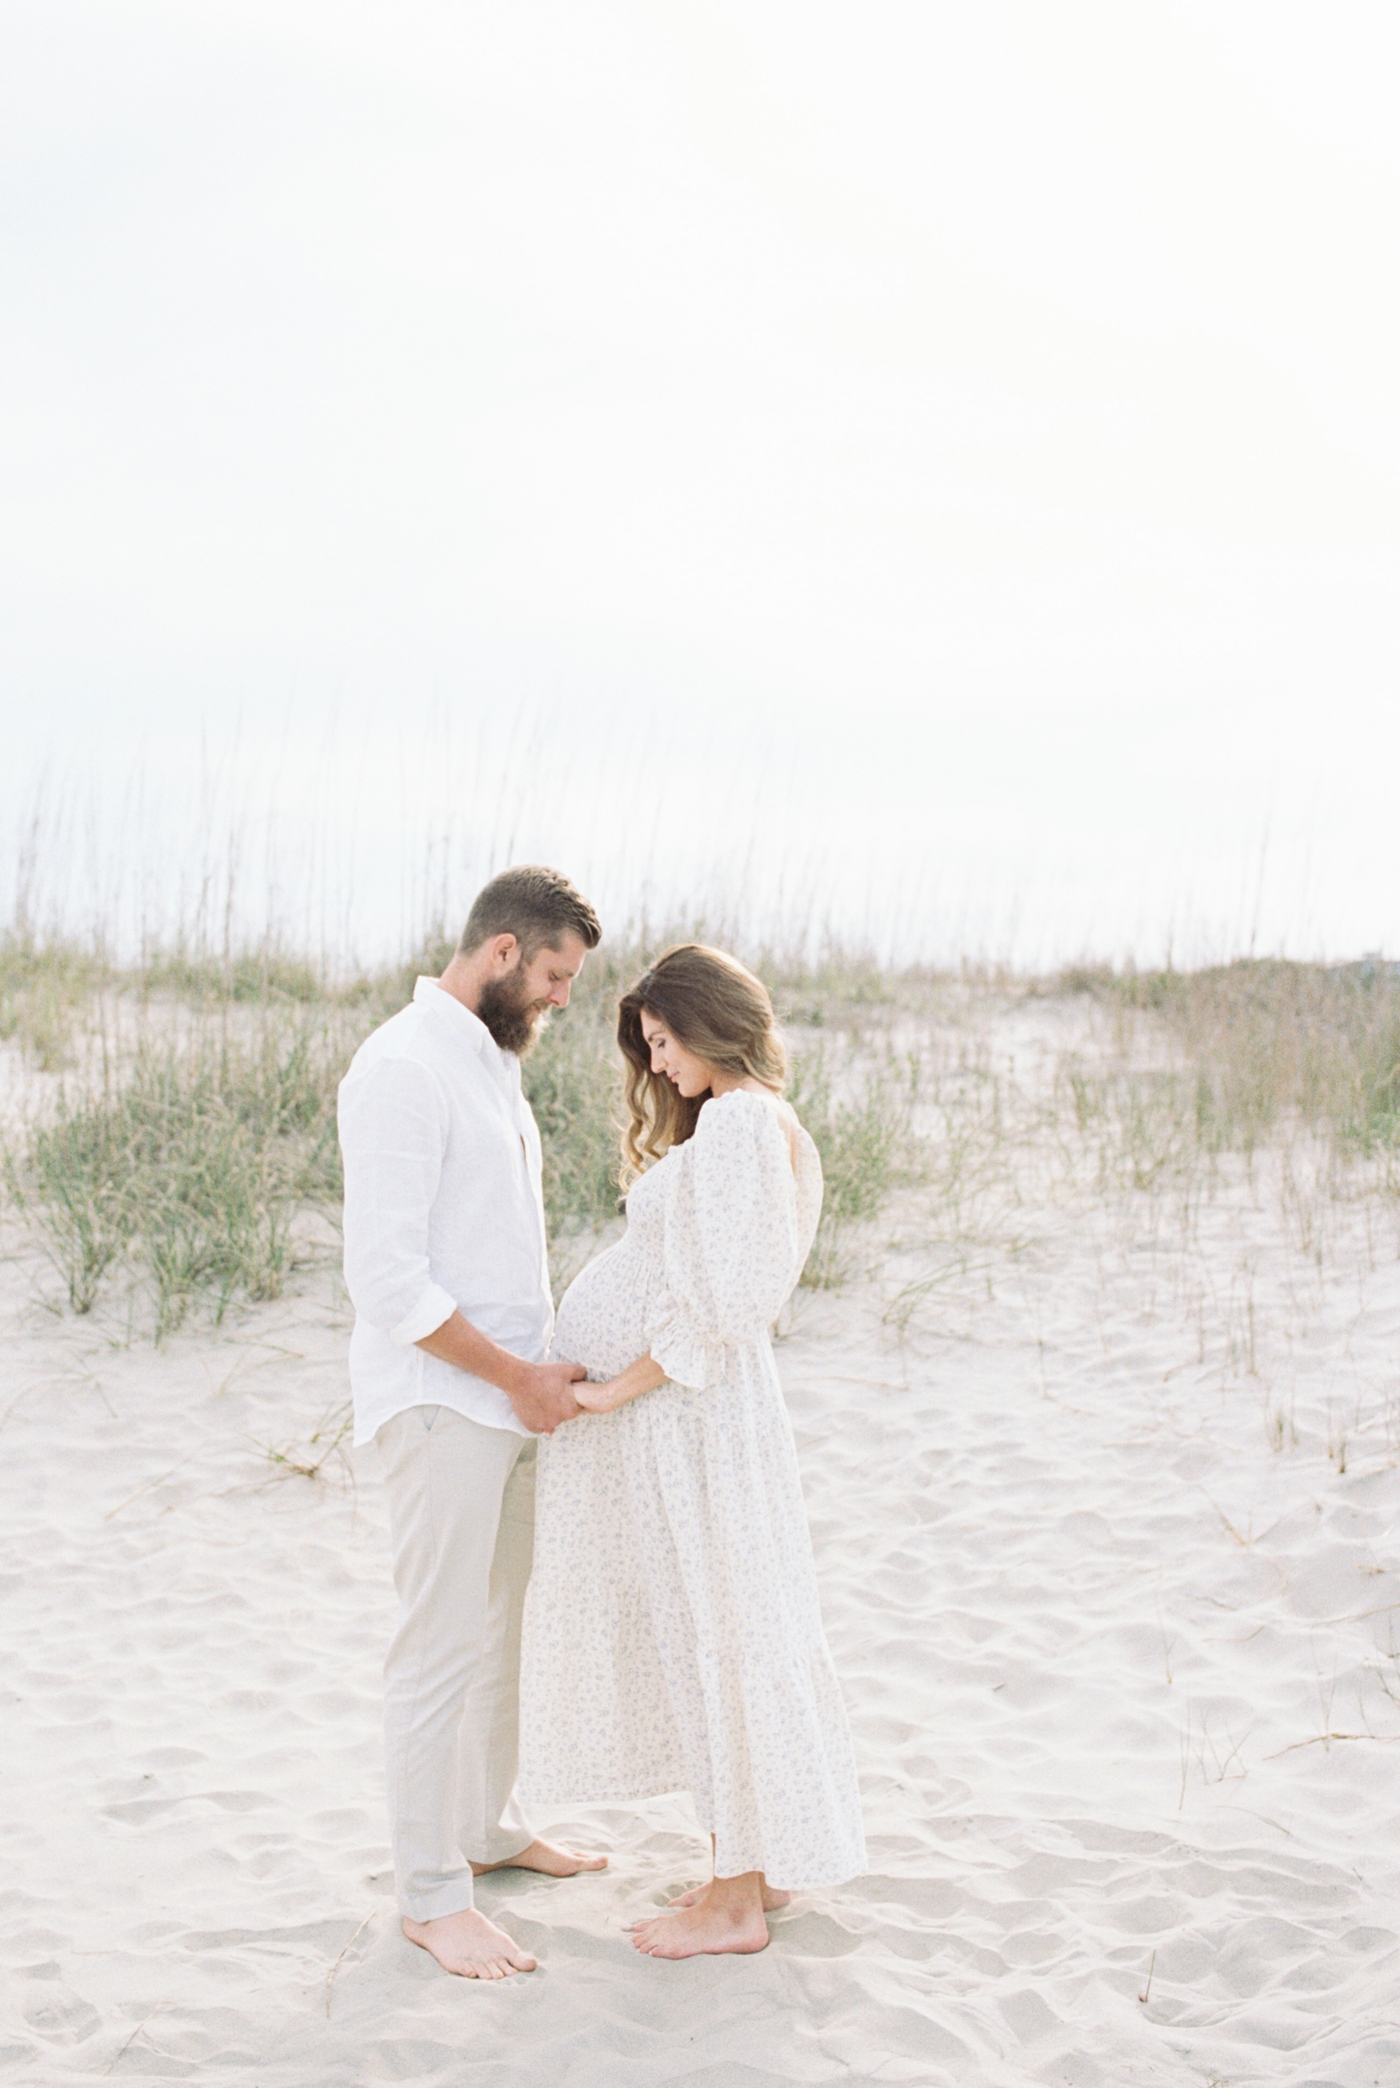 Mom and dad holding hands during maternity Session on the beach | Photo by Caitlyn Motycka Photography.